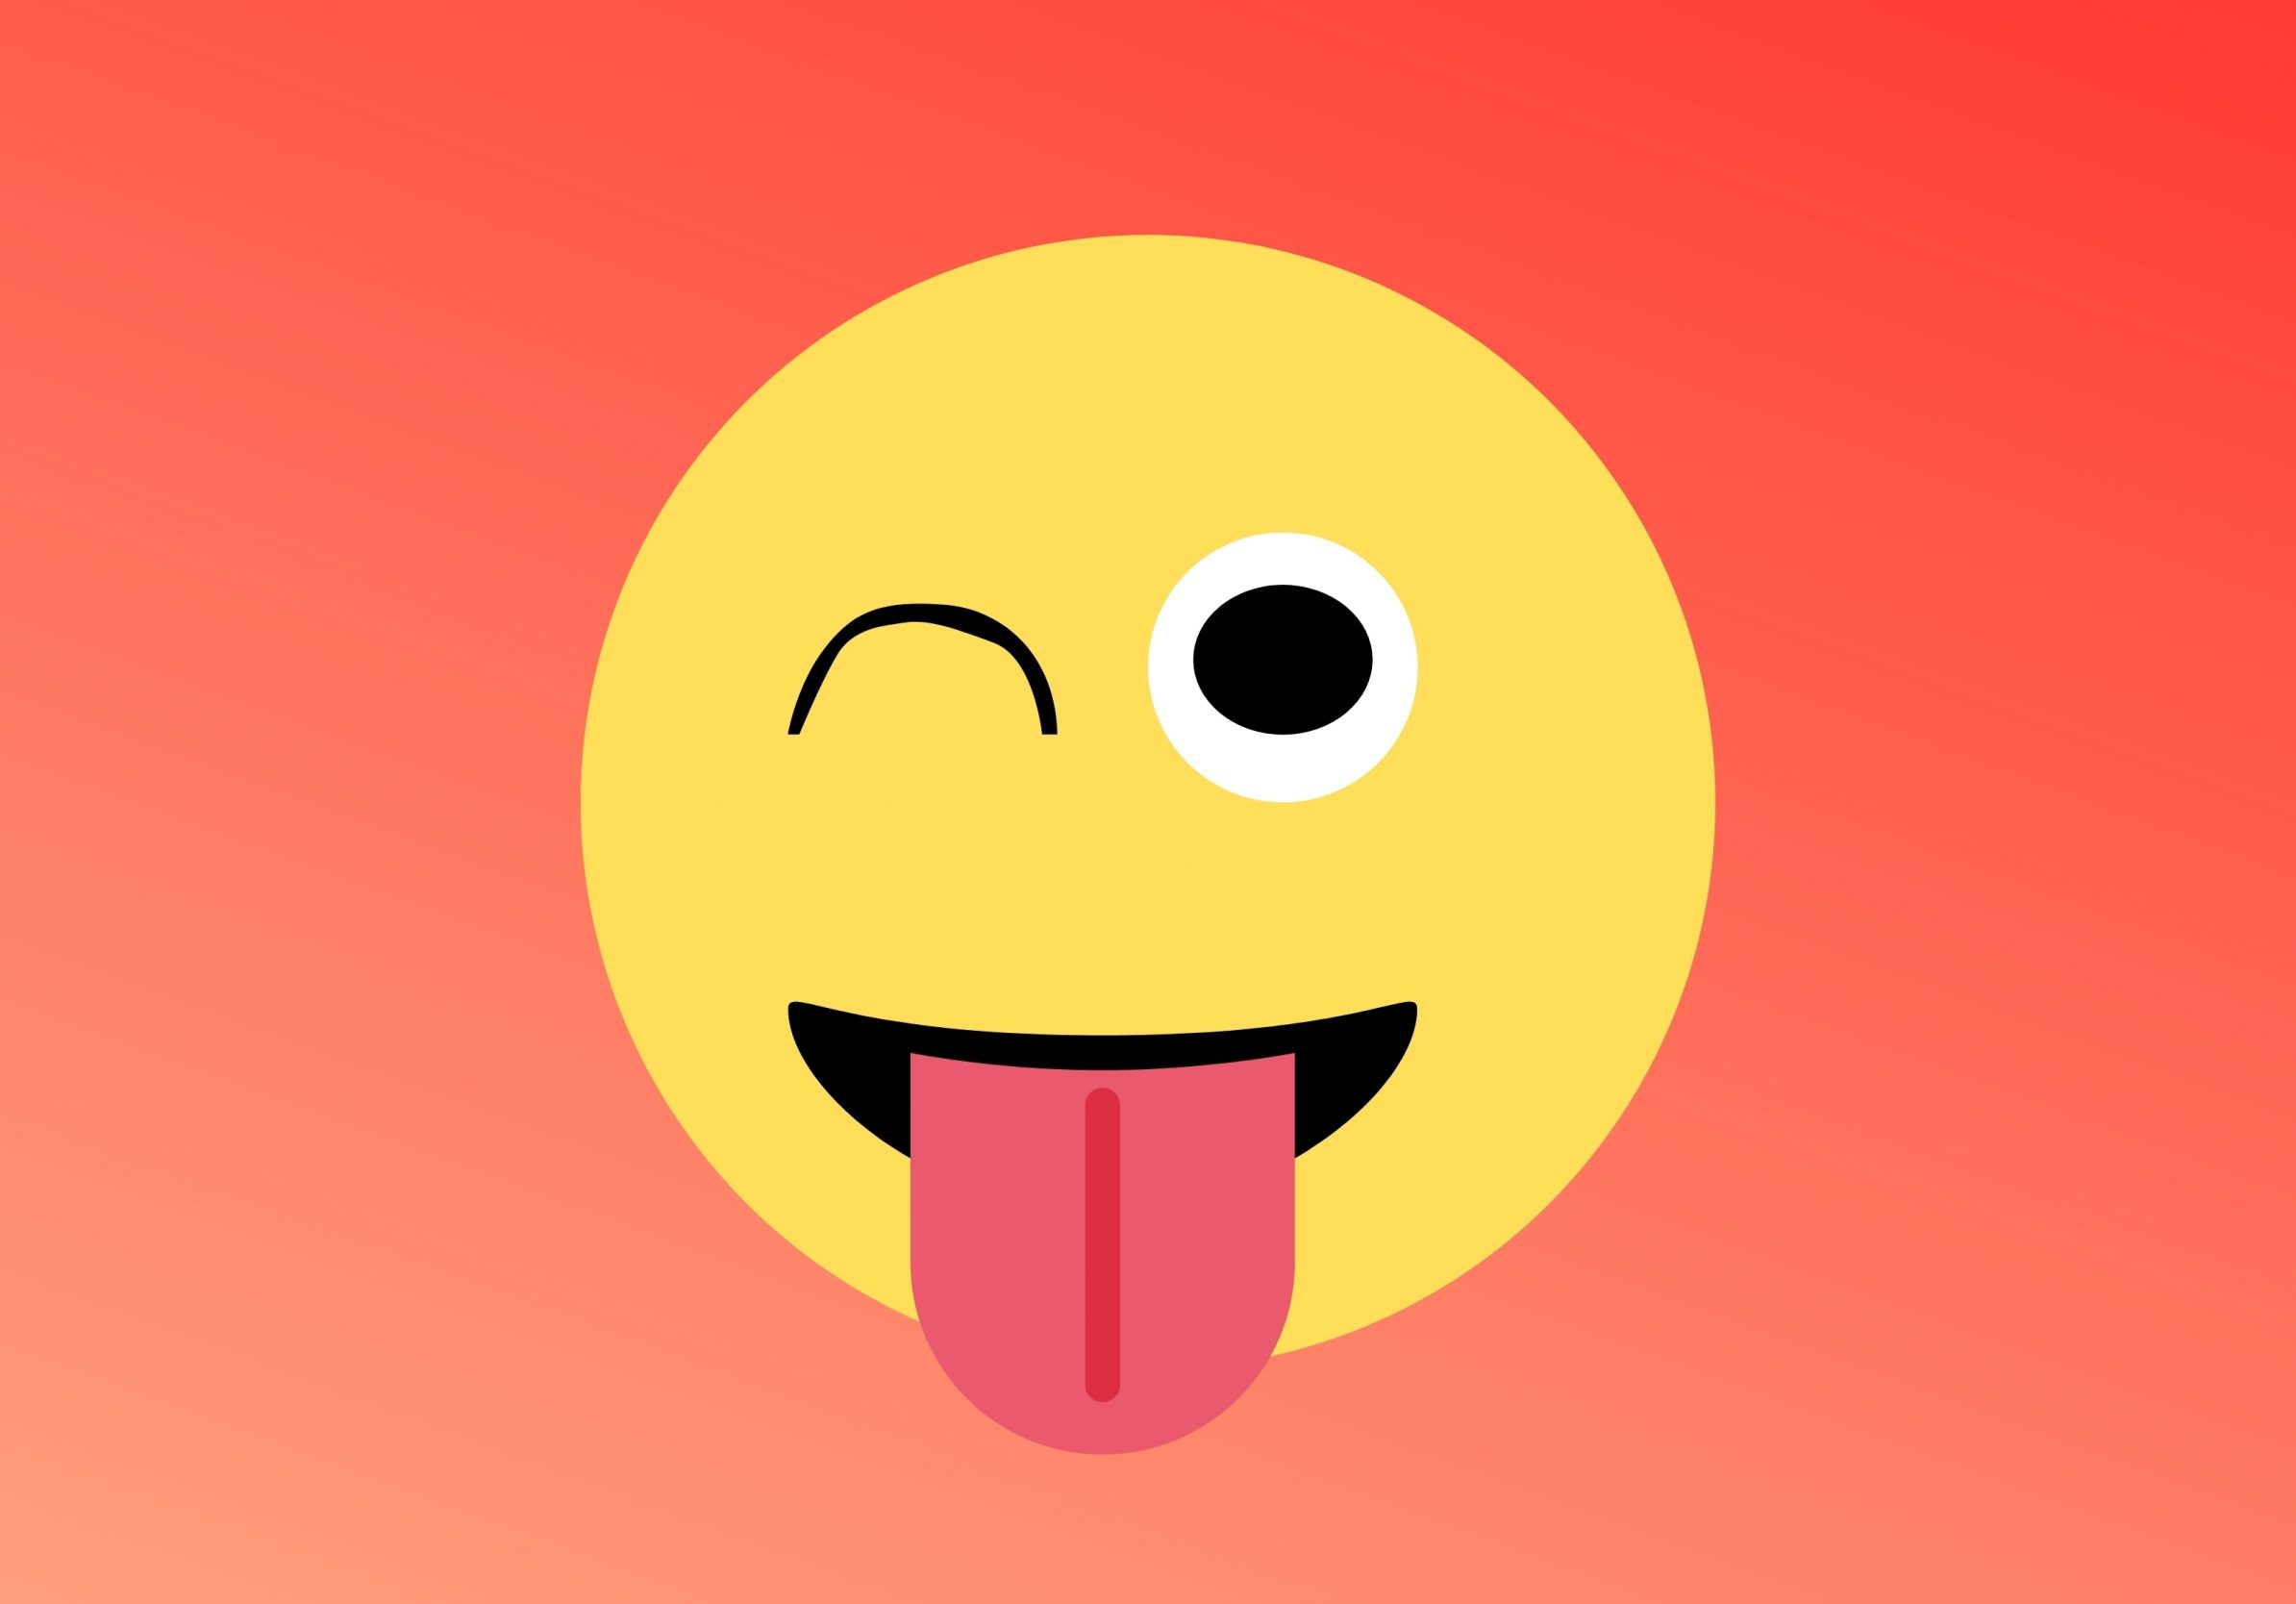 2388x1668 iPad Pro wallpapers Winking Face Tongue Red Background iPad Wallpaper 2388x1668 pixels resolution